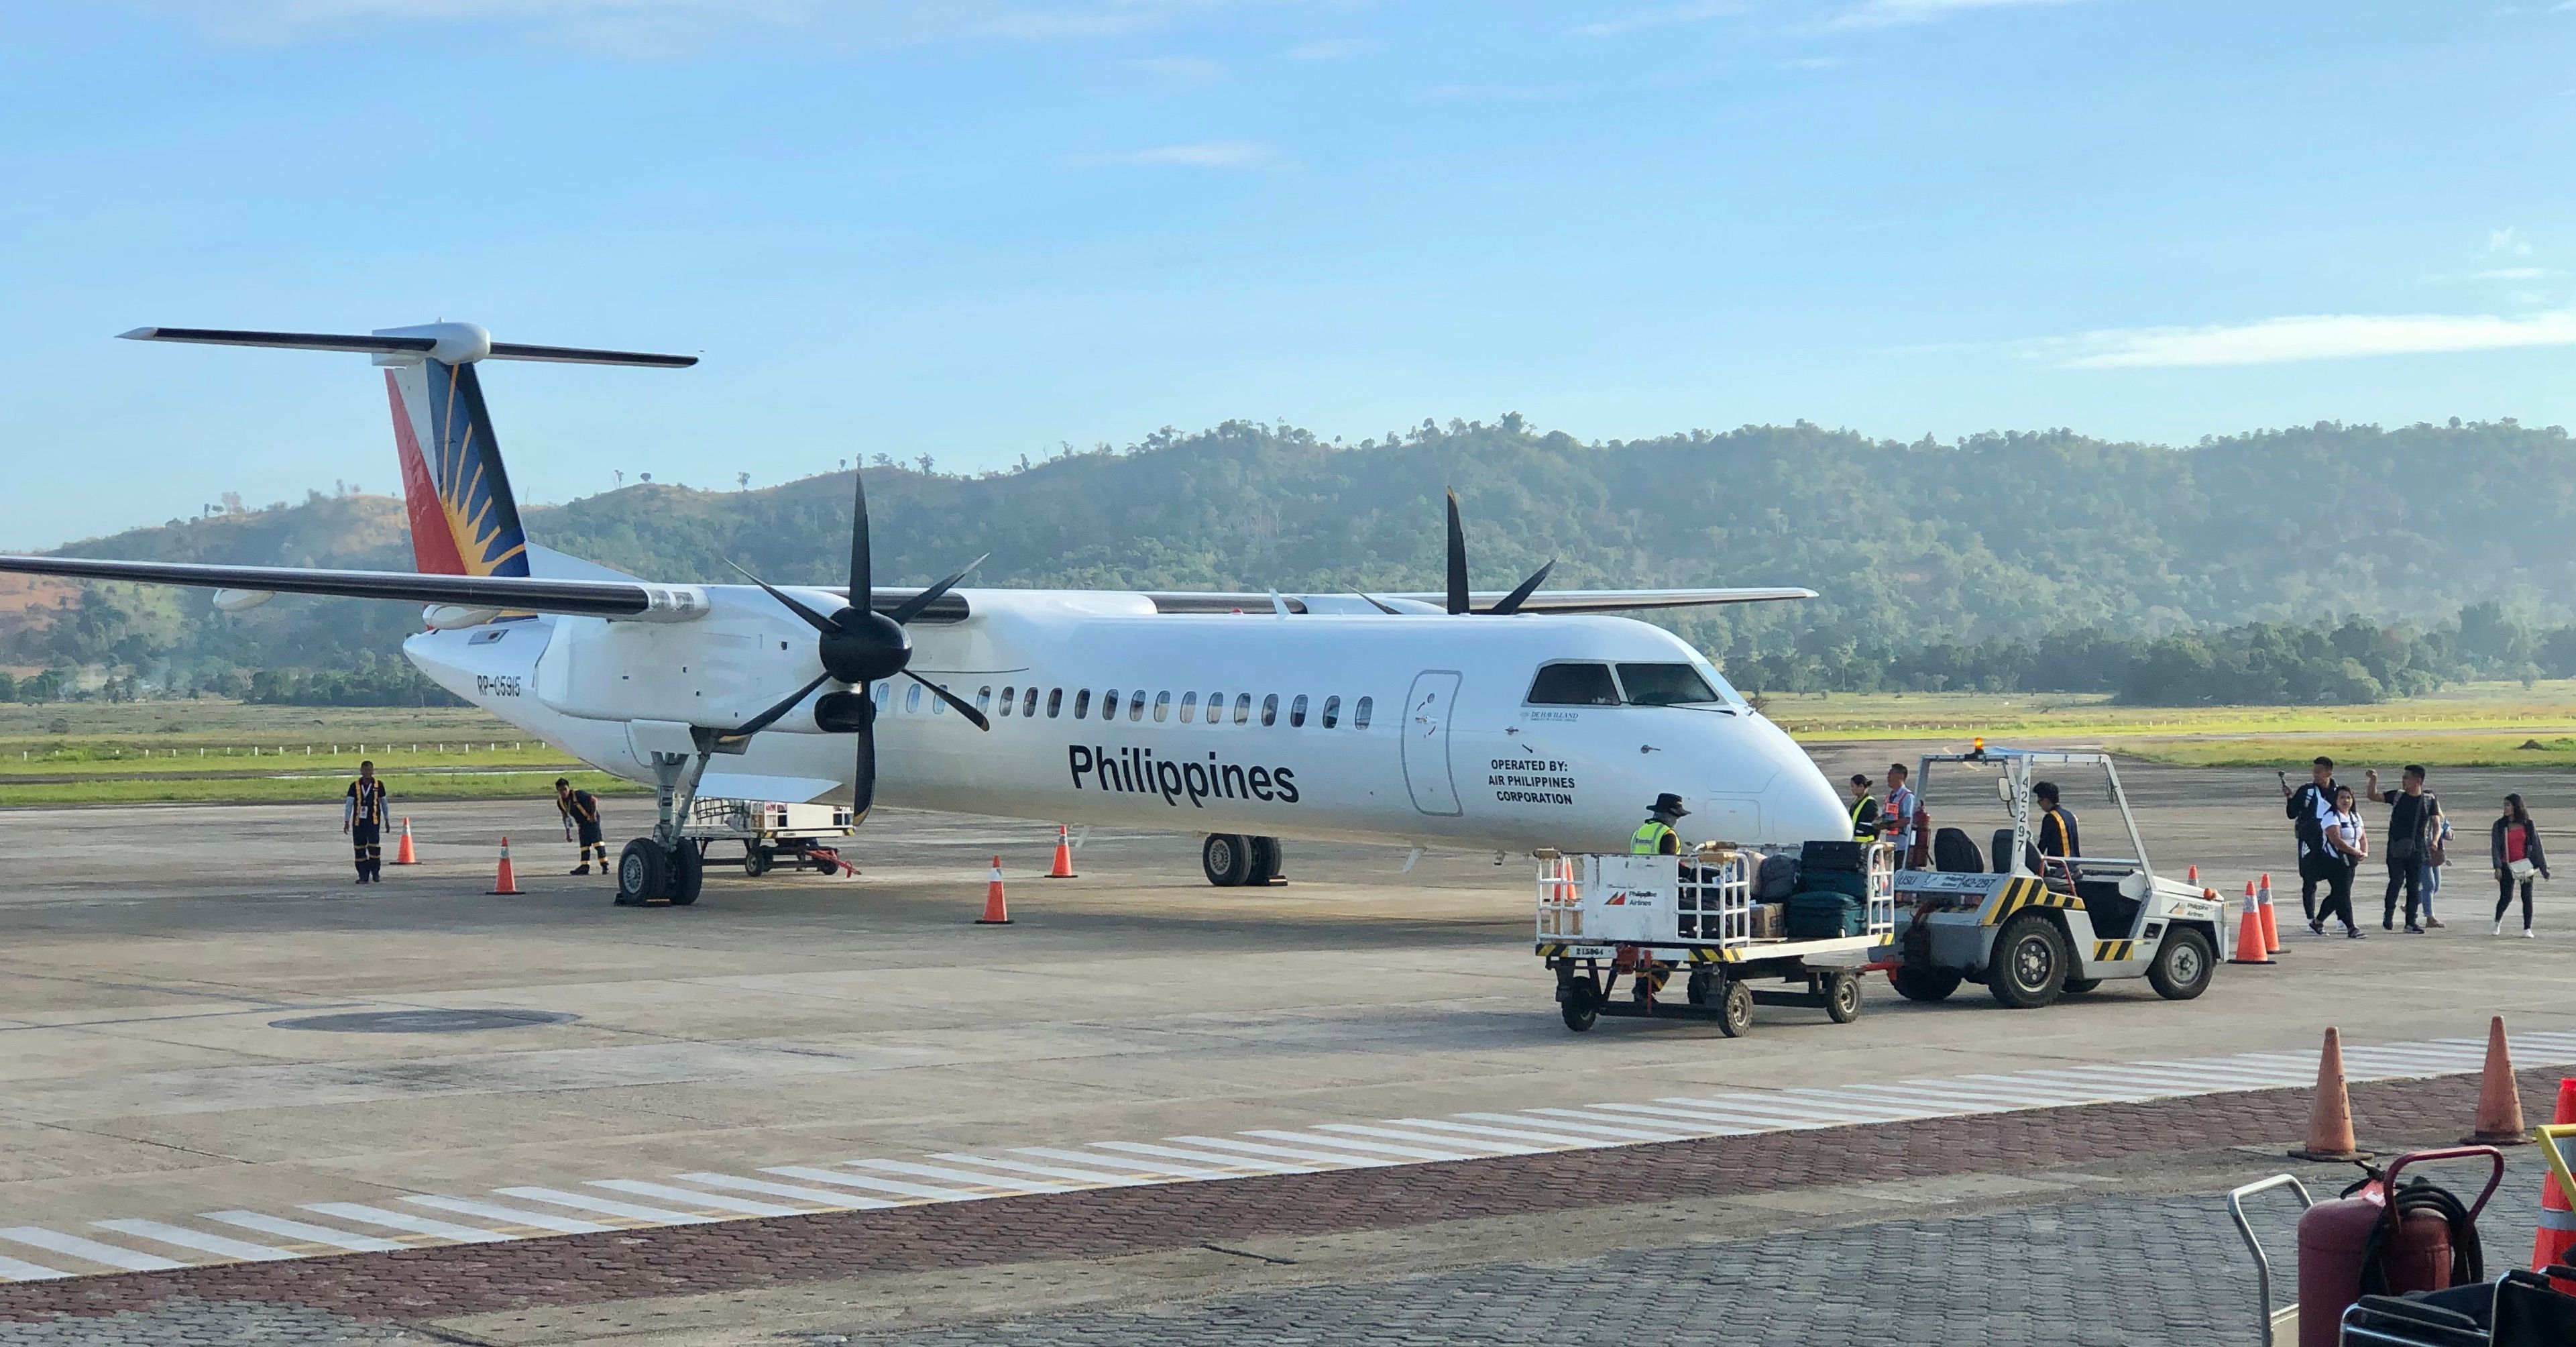 A Philippine Airlines DeHavilland Dash 8 turbo prop Aircraft parked at the airport.